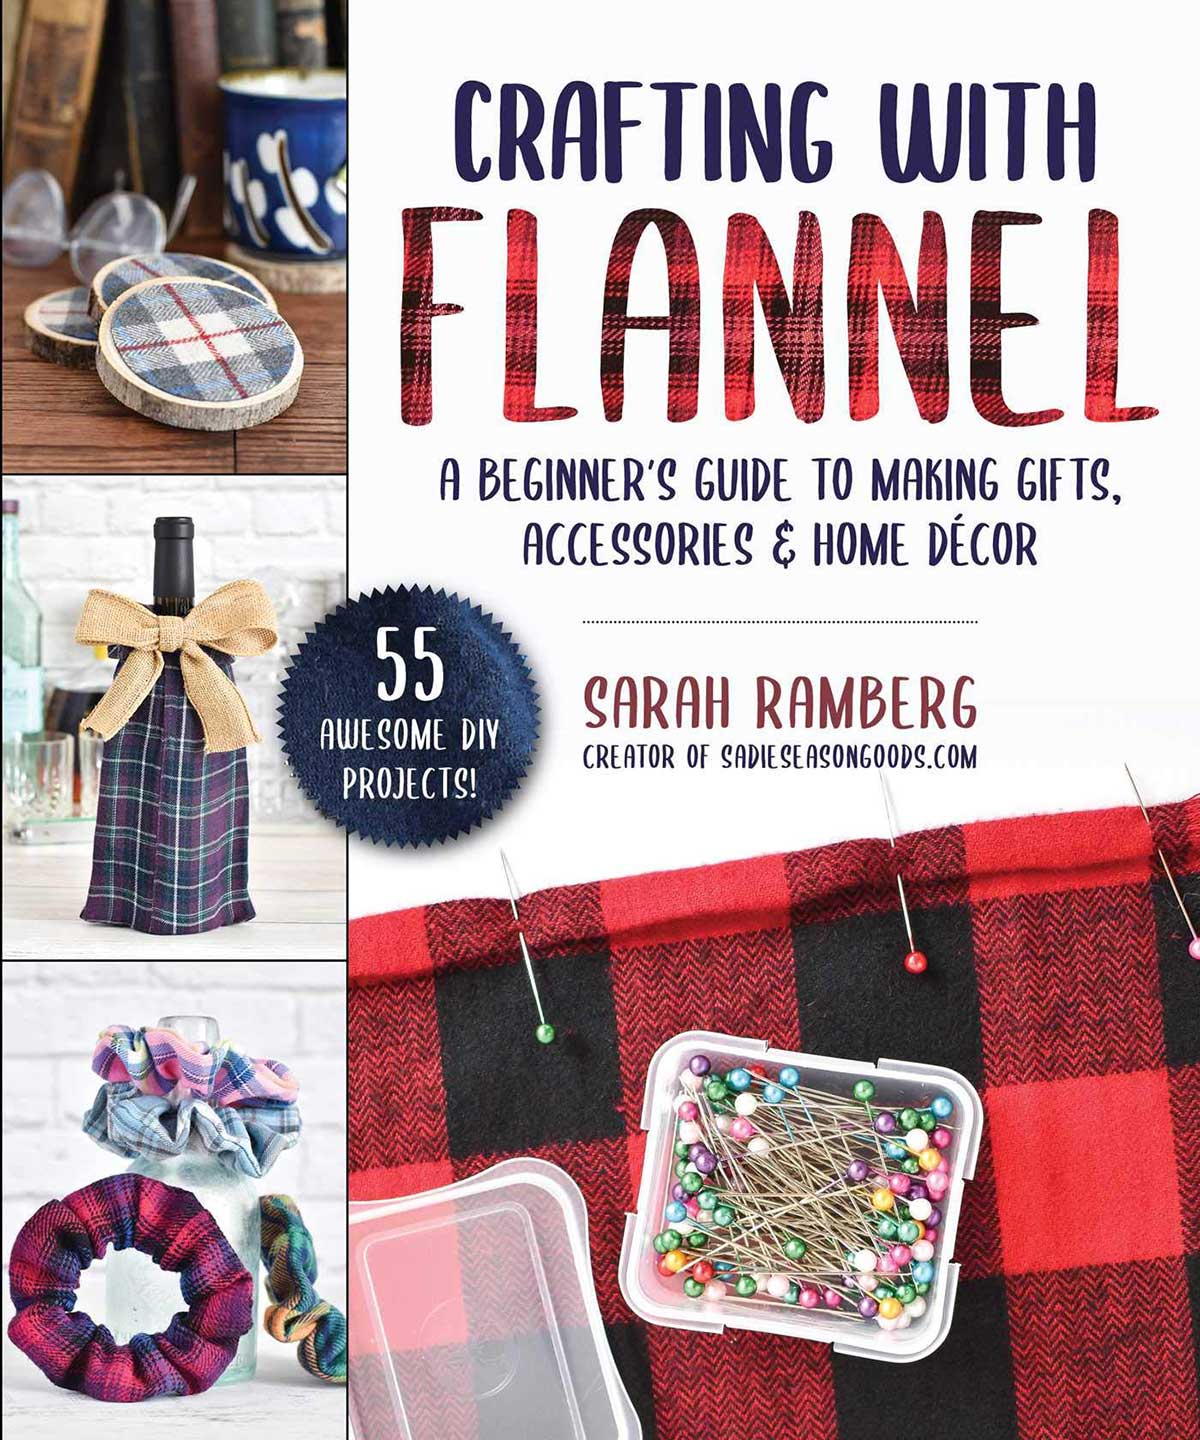 Book about crafting with flannel - upcycling projects using flannel